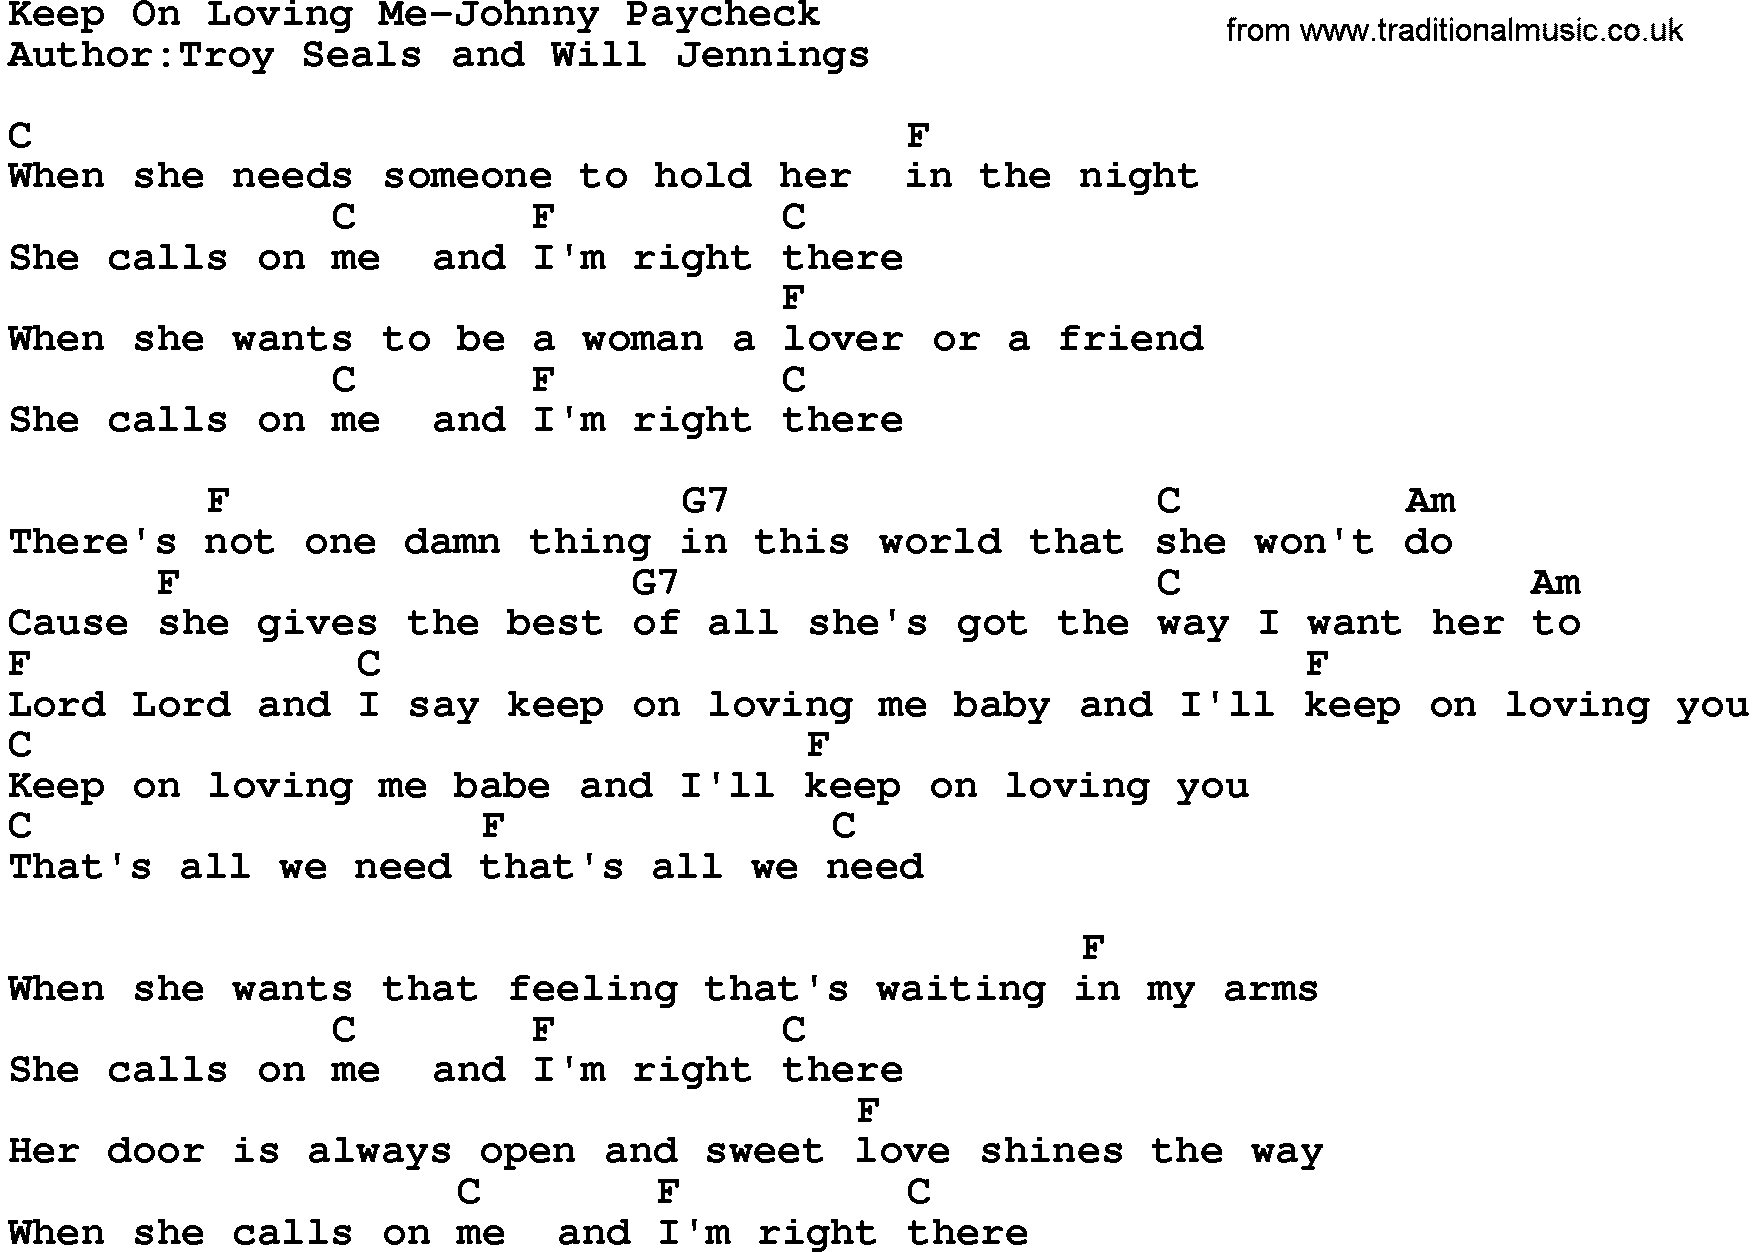 Country music song: Keep On Loving Me-Johnny Paycheck lyrics and chords